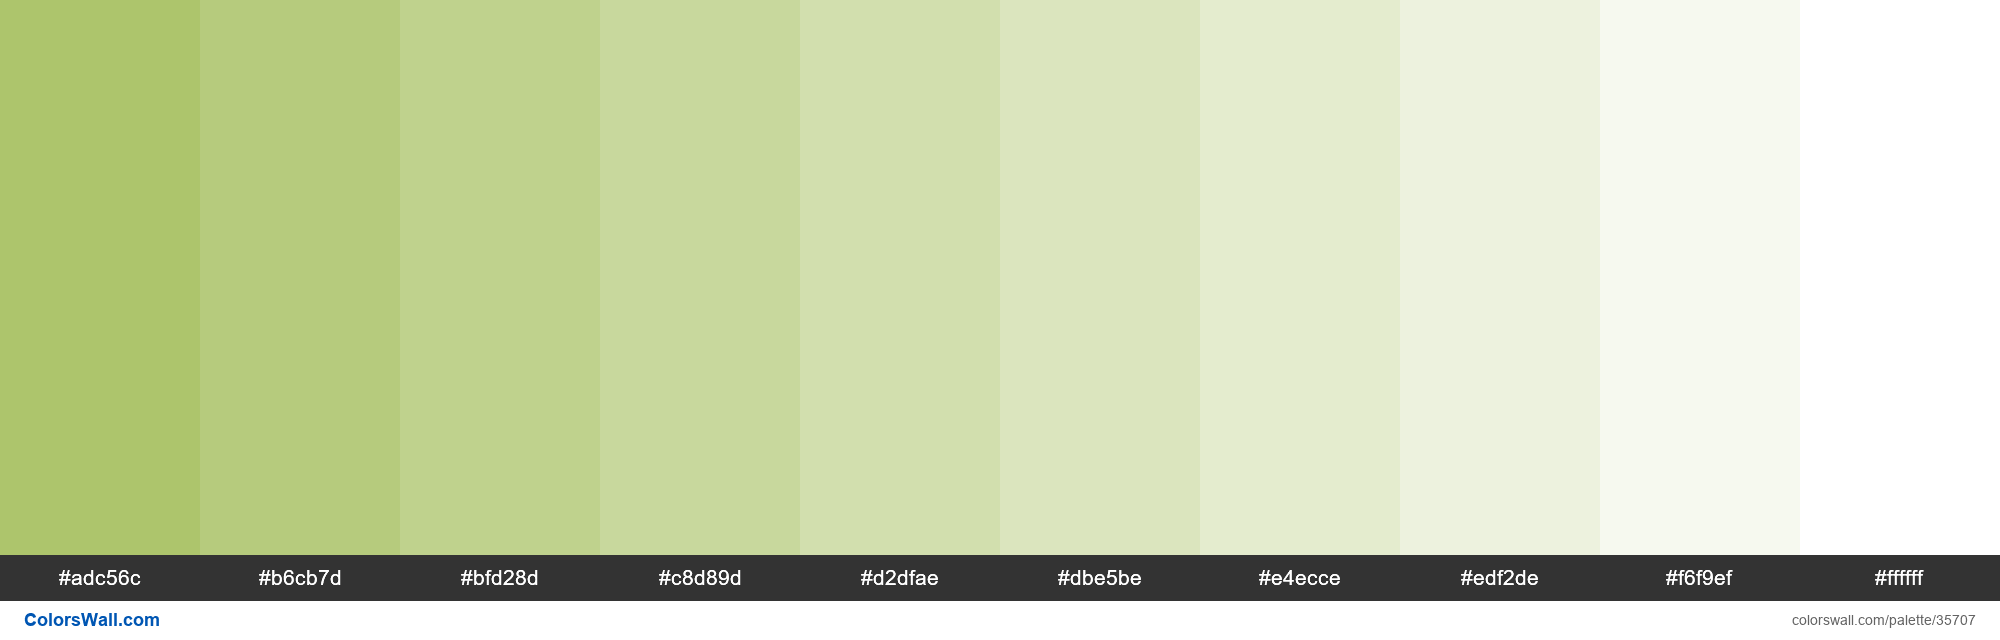 XKCD Color light olive green #a4be5c hex colors palette - ColorsWall